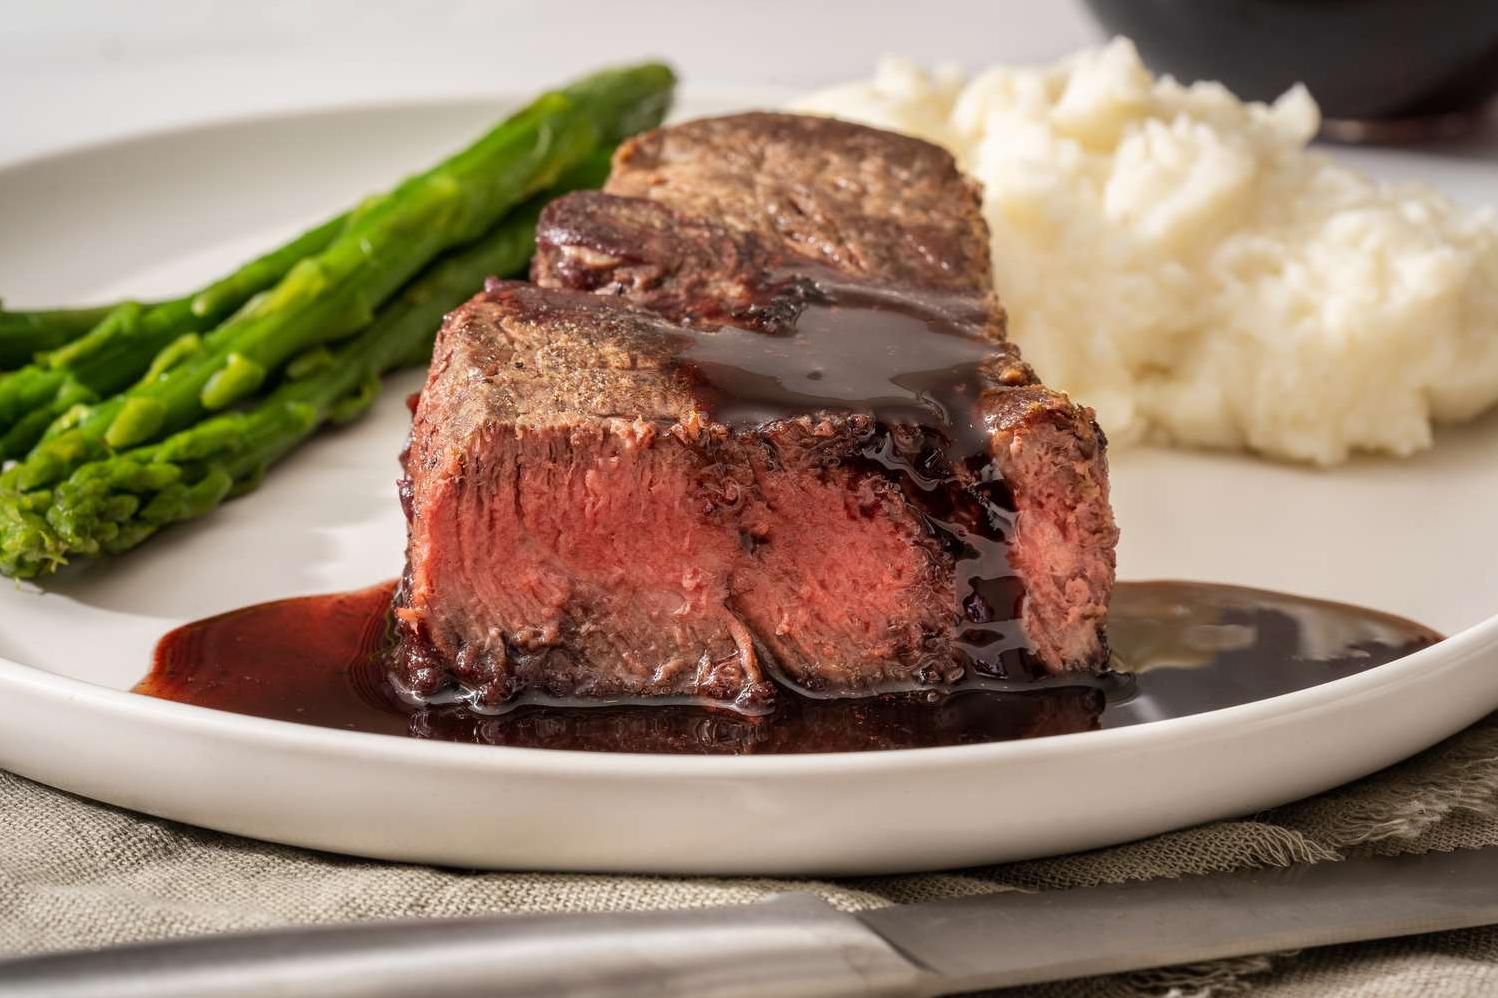  No beef dinner is complete without this rich and indulgent red wine sauce.